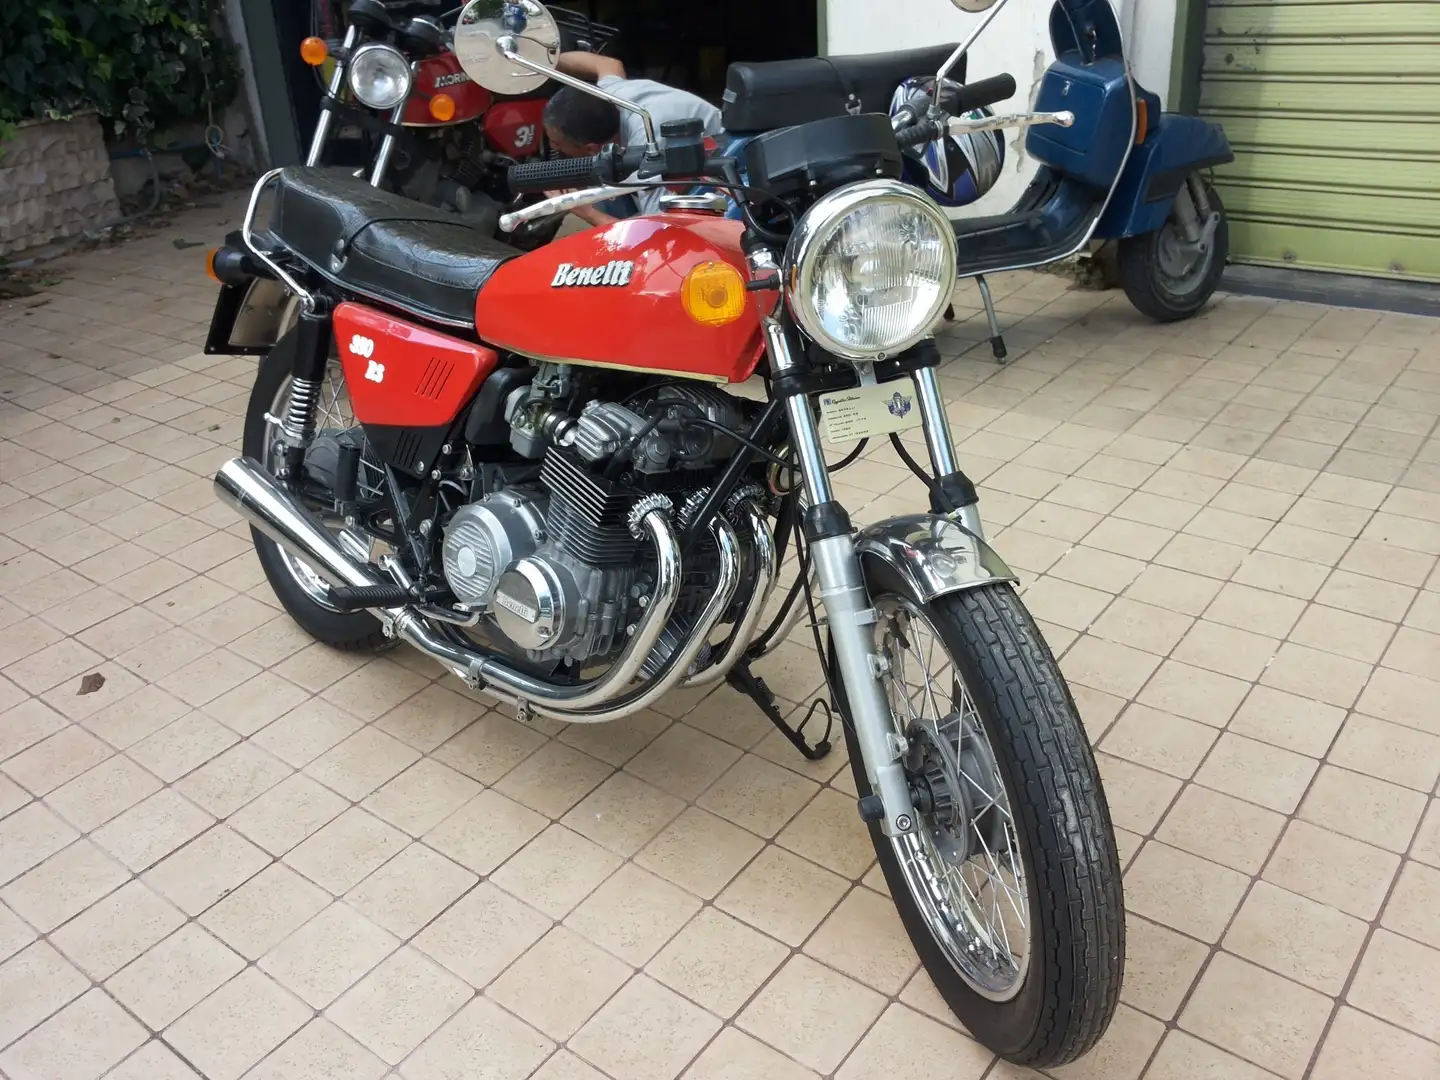 Benelli 350 RS Red - 1